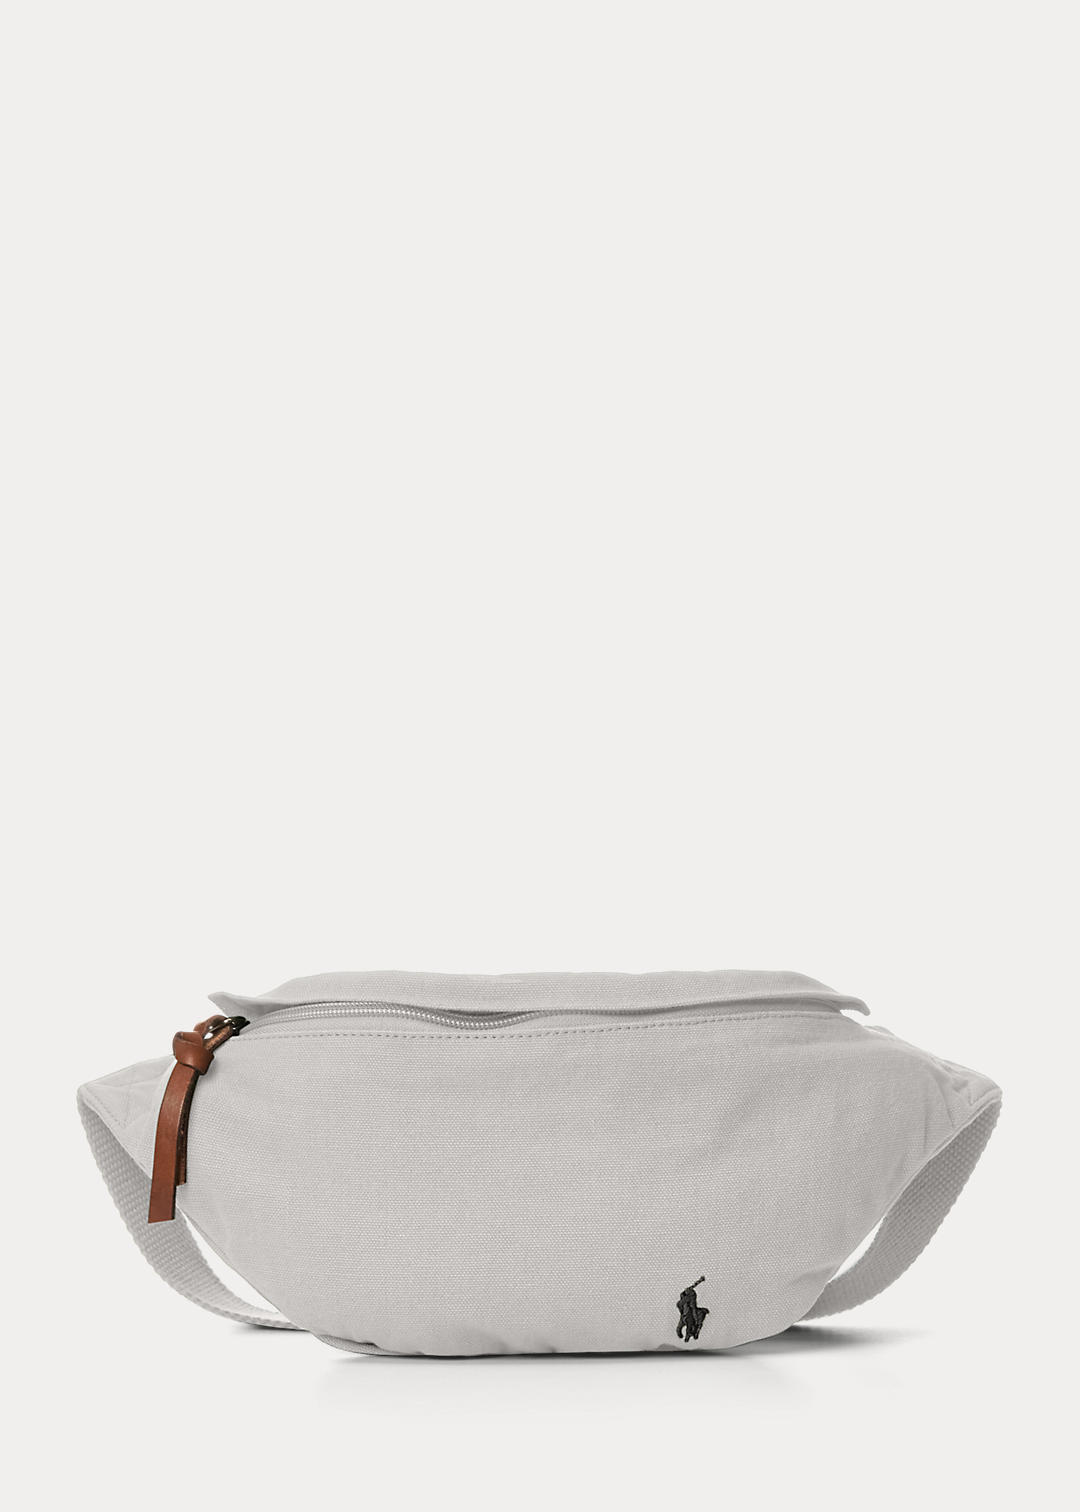 Polo Canvas Waist Pack (Fanny Pack)